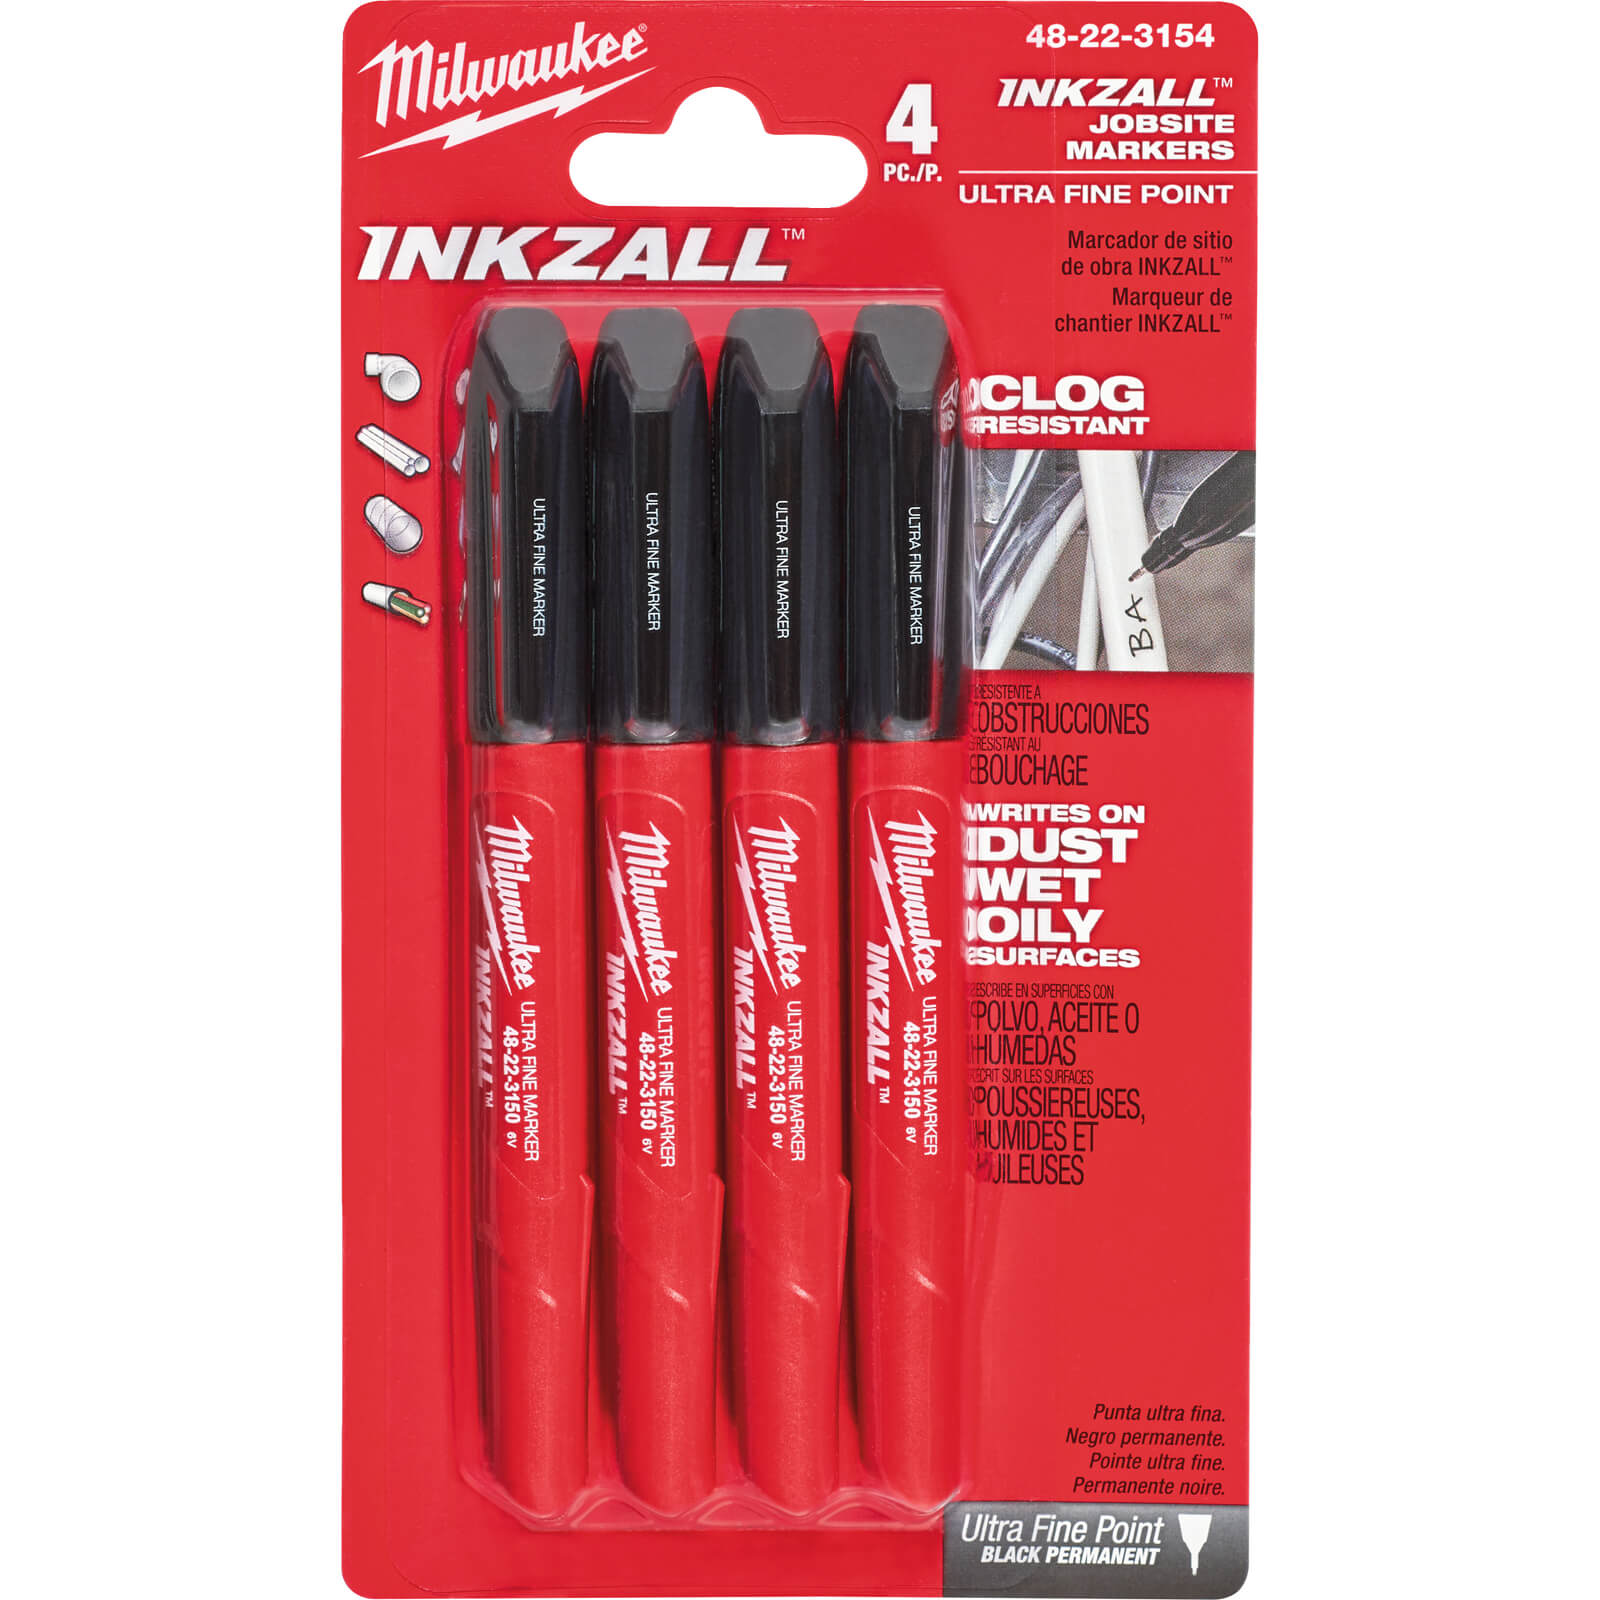 Image of Milwaukee 4 Piece Inkzall Fine Tip Marker Pens Pack of 4